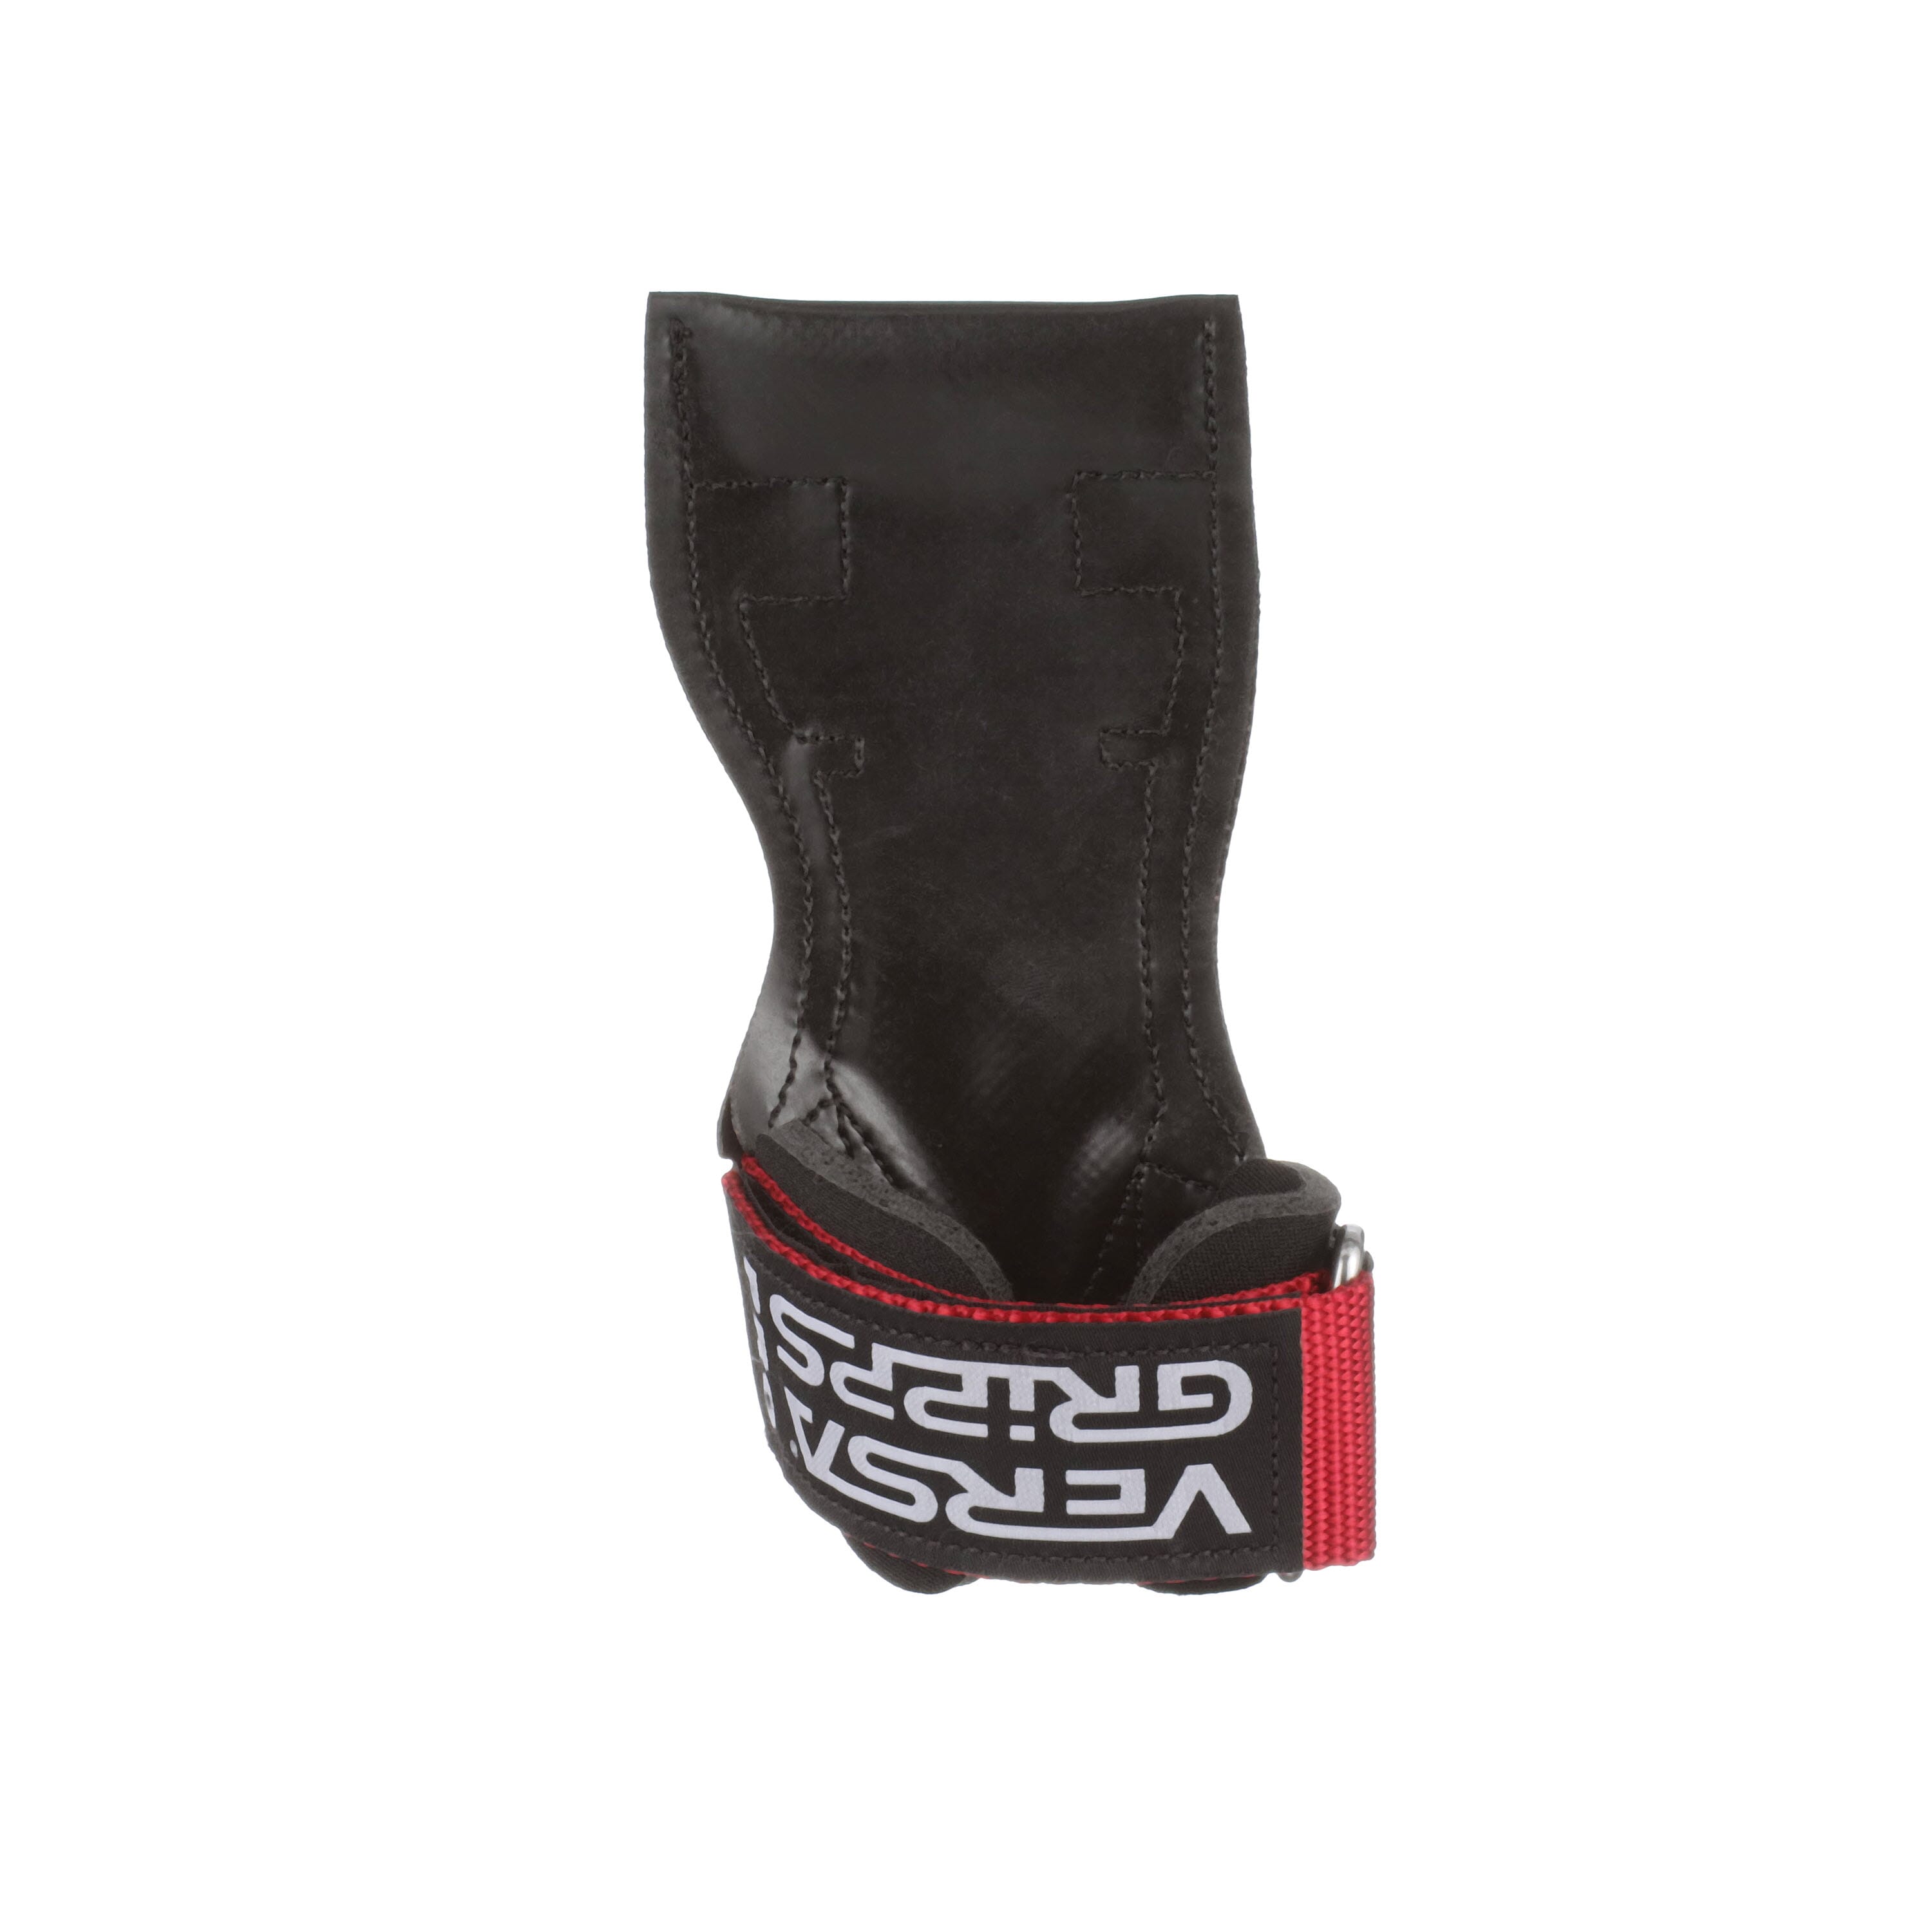 The Best Training Accessory in The World Versa Gripps® PRO Authentic Made in The USA 